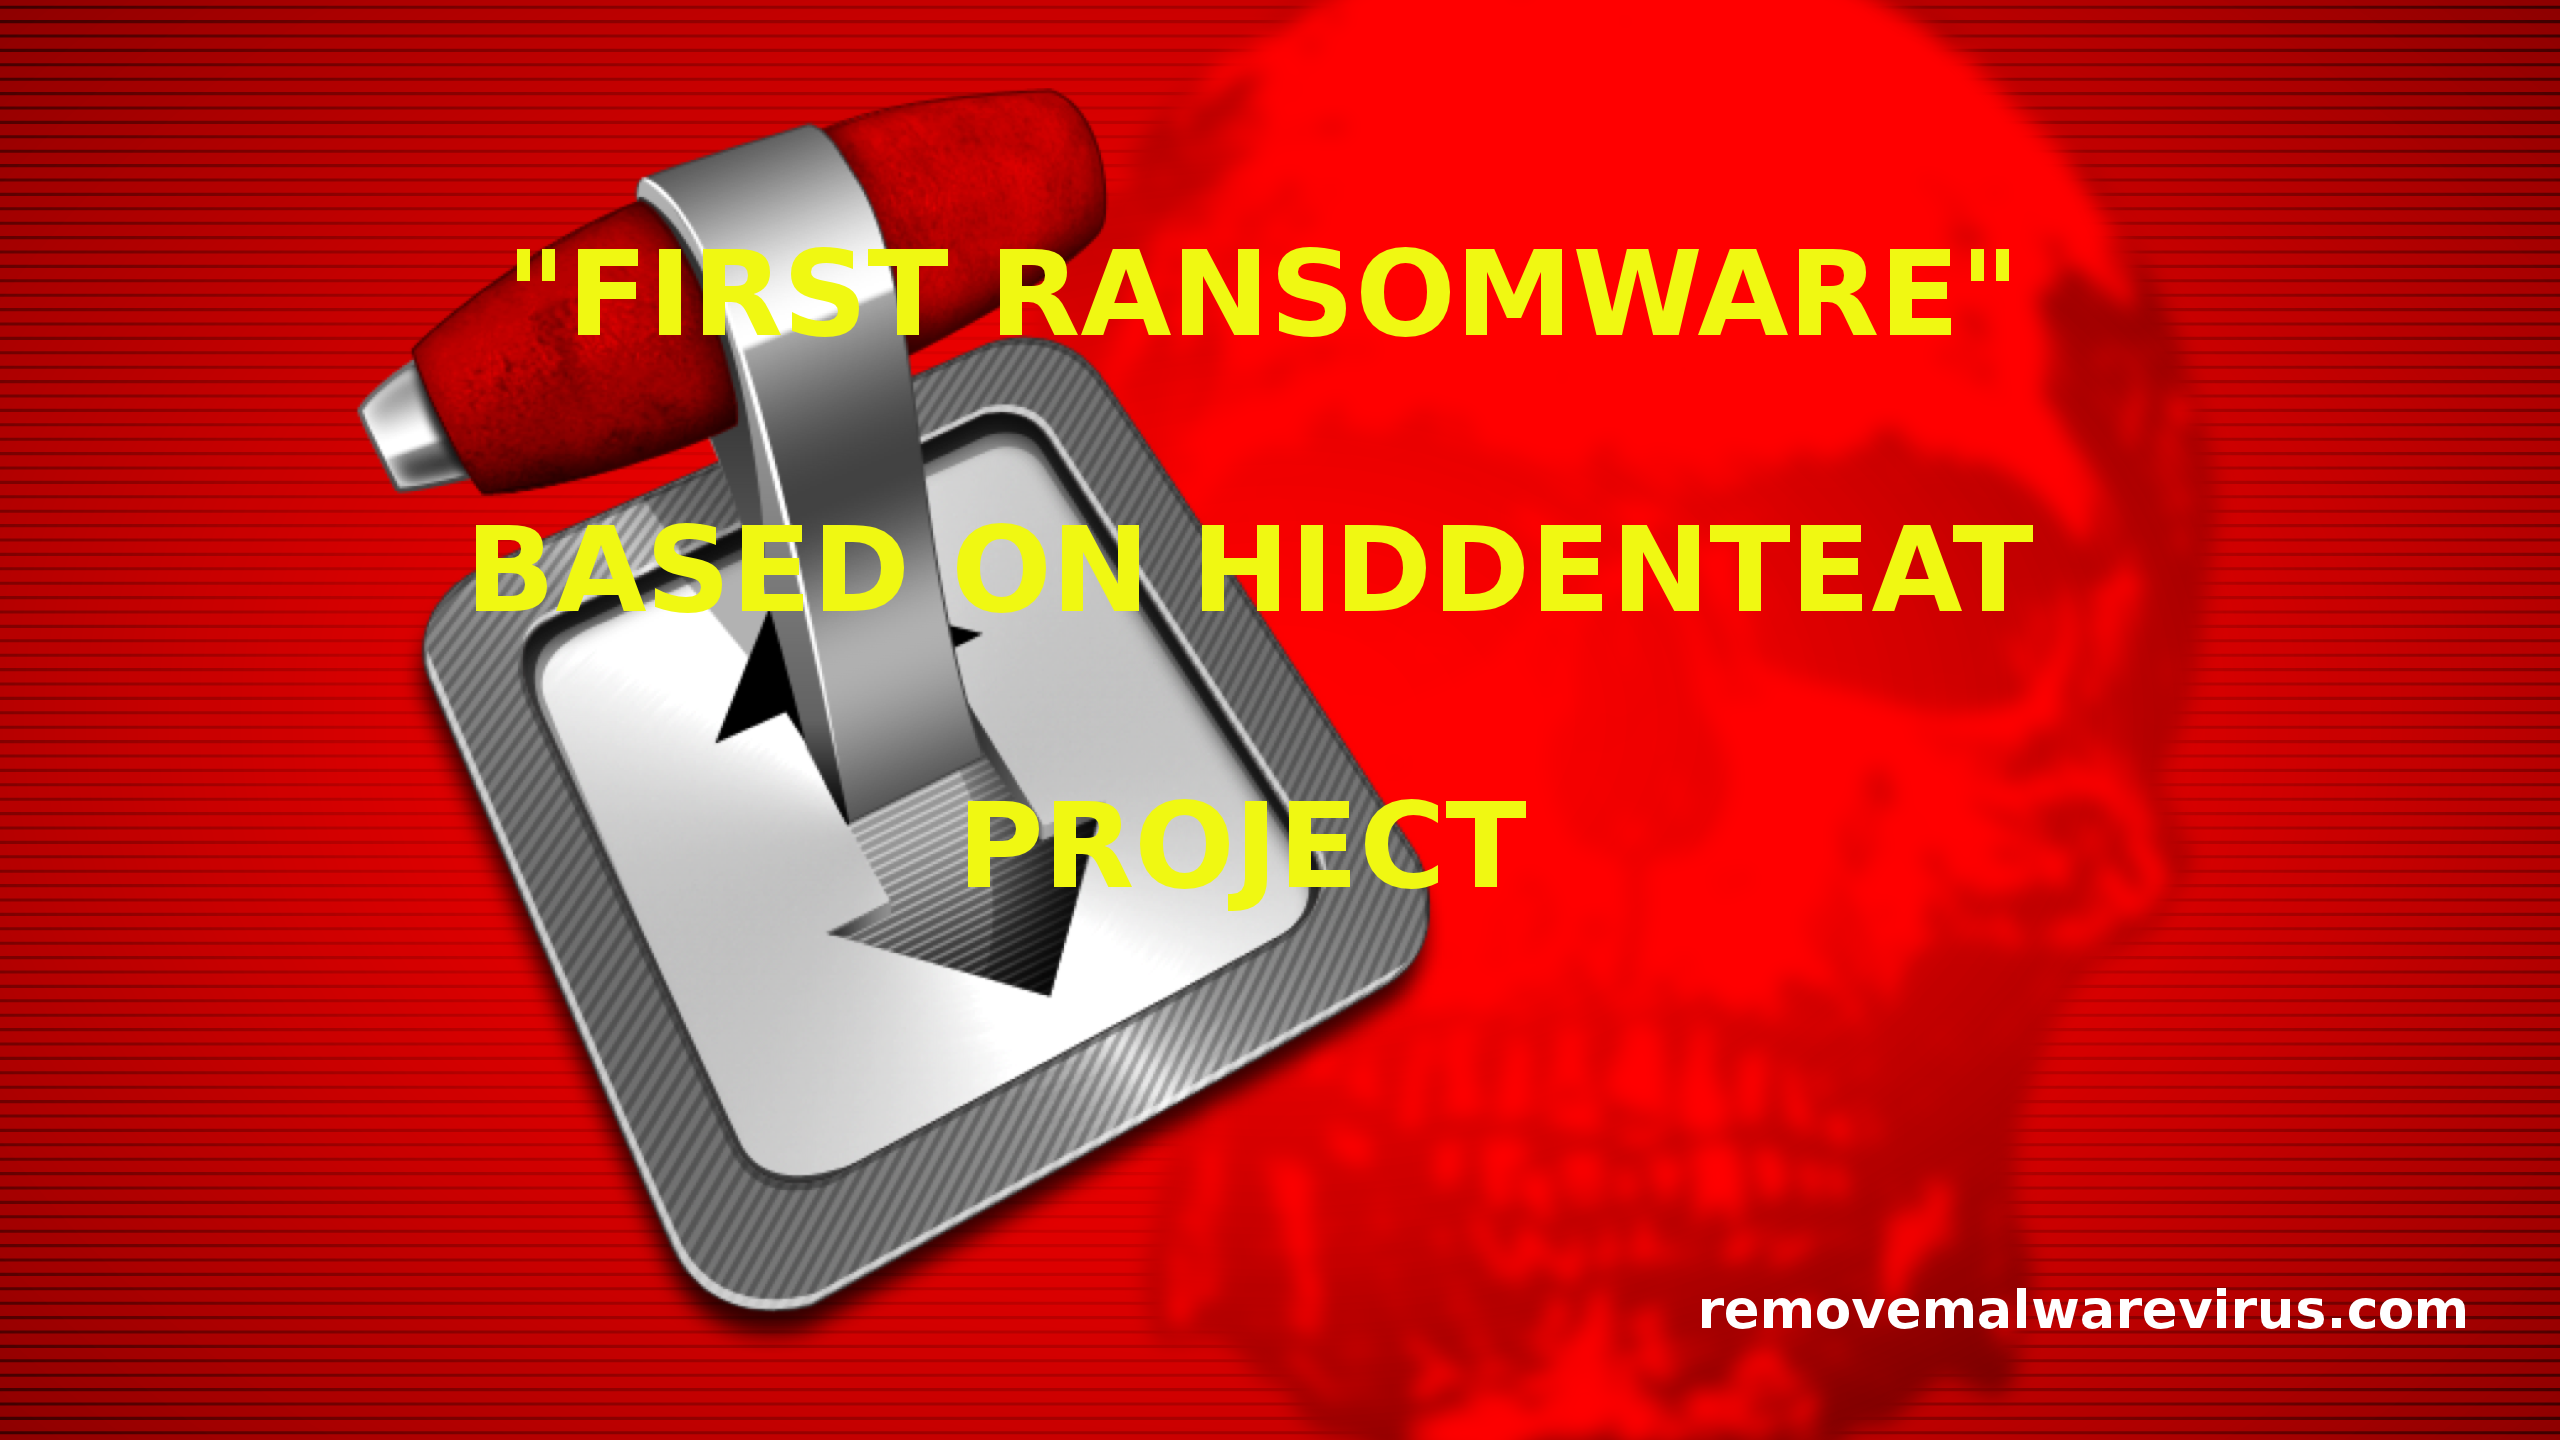 First Ransomware removal and file decryption